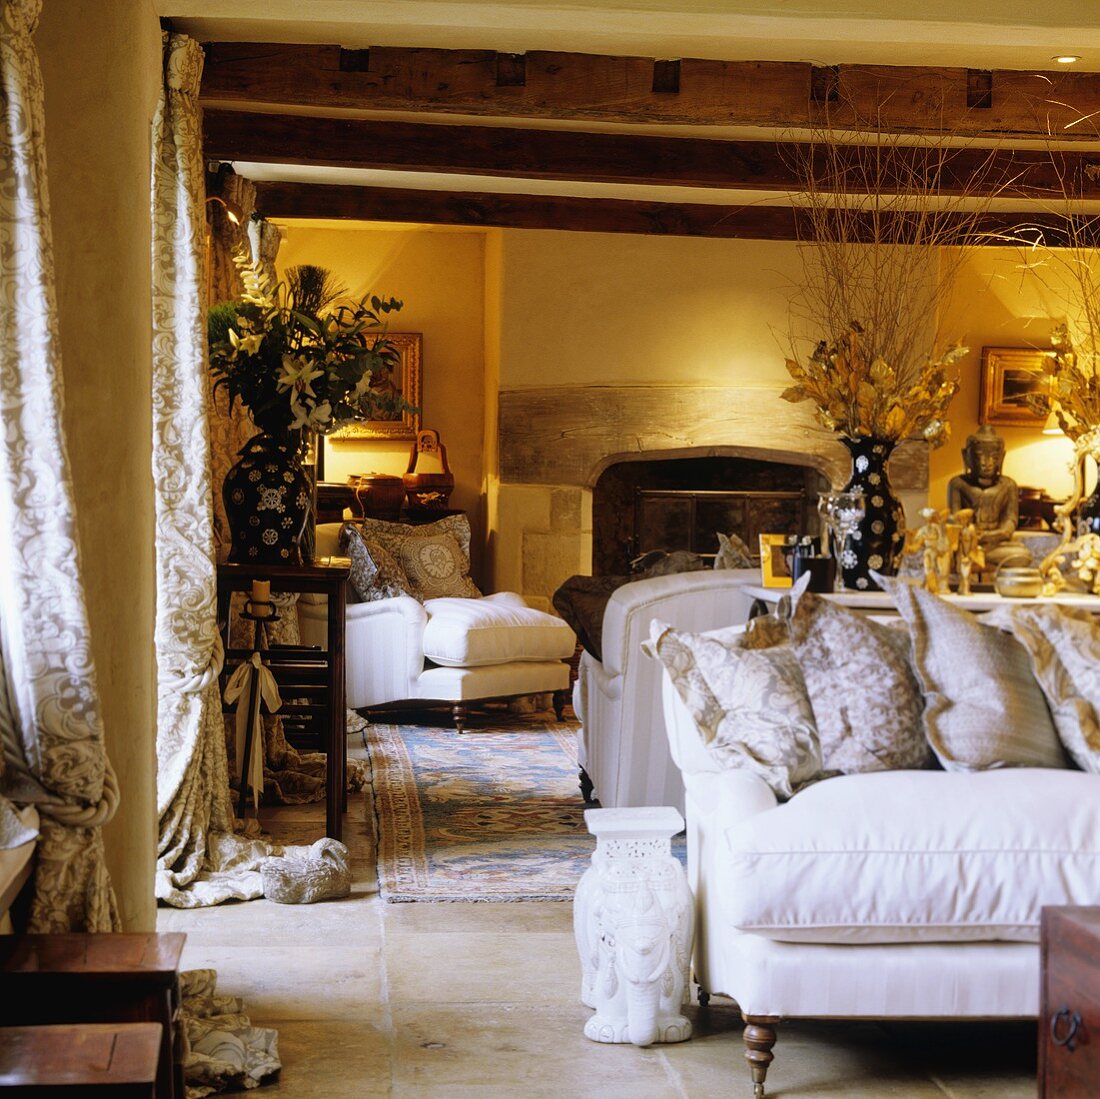 Warm artificial lighting in a country-style living room with a white sofa under a rustic wooden beamed ceiling